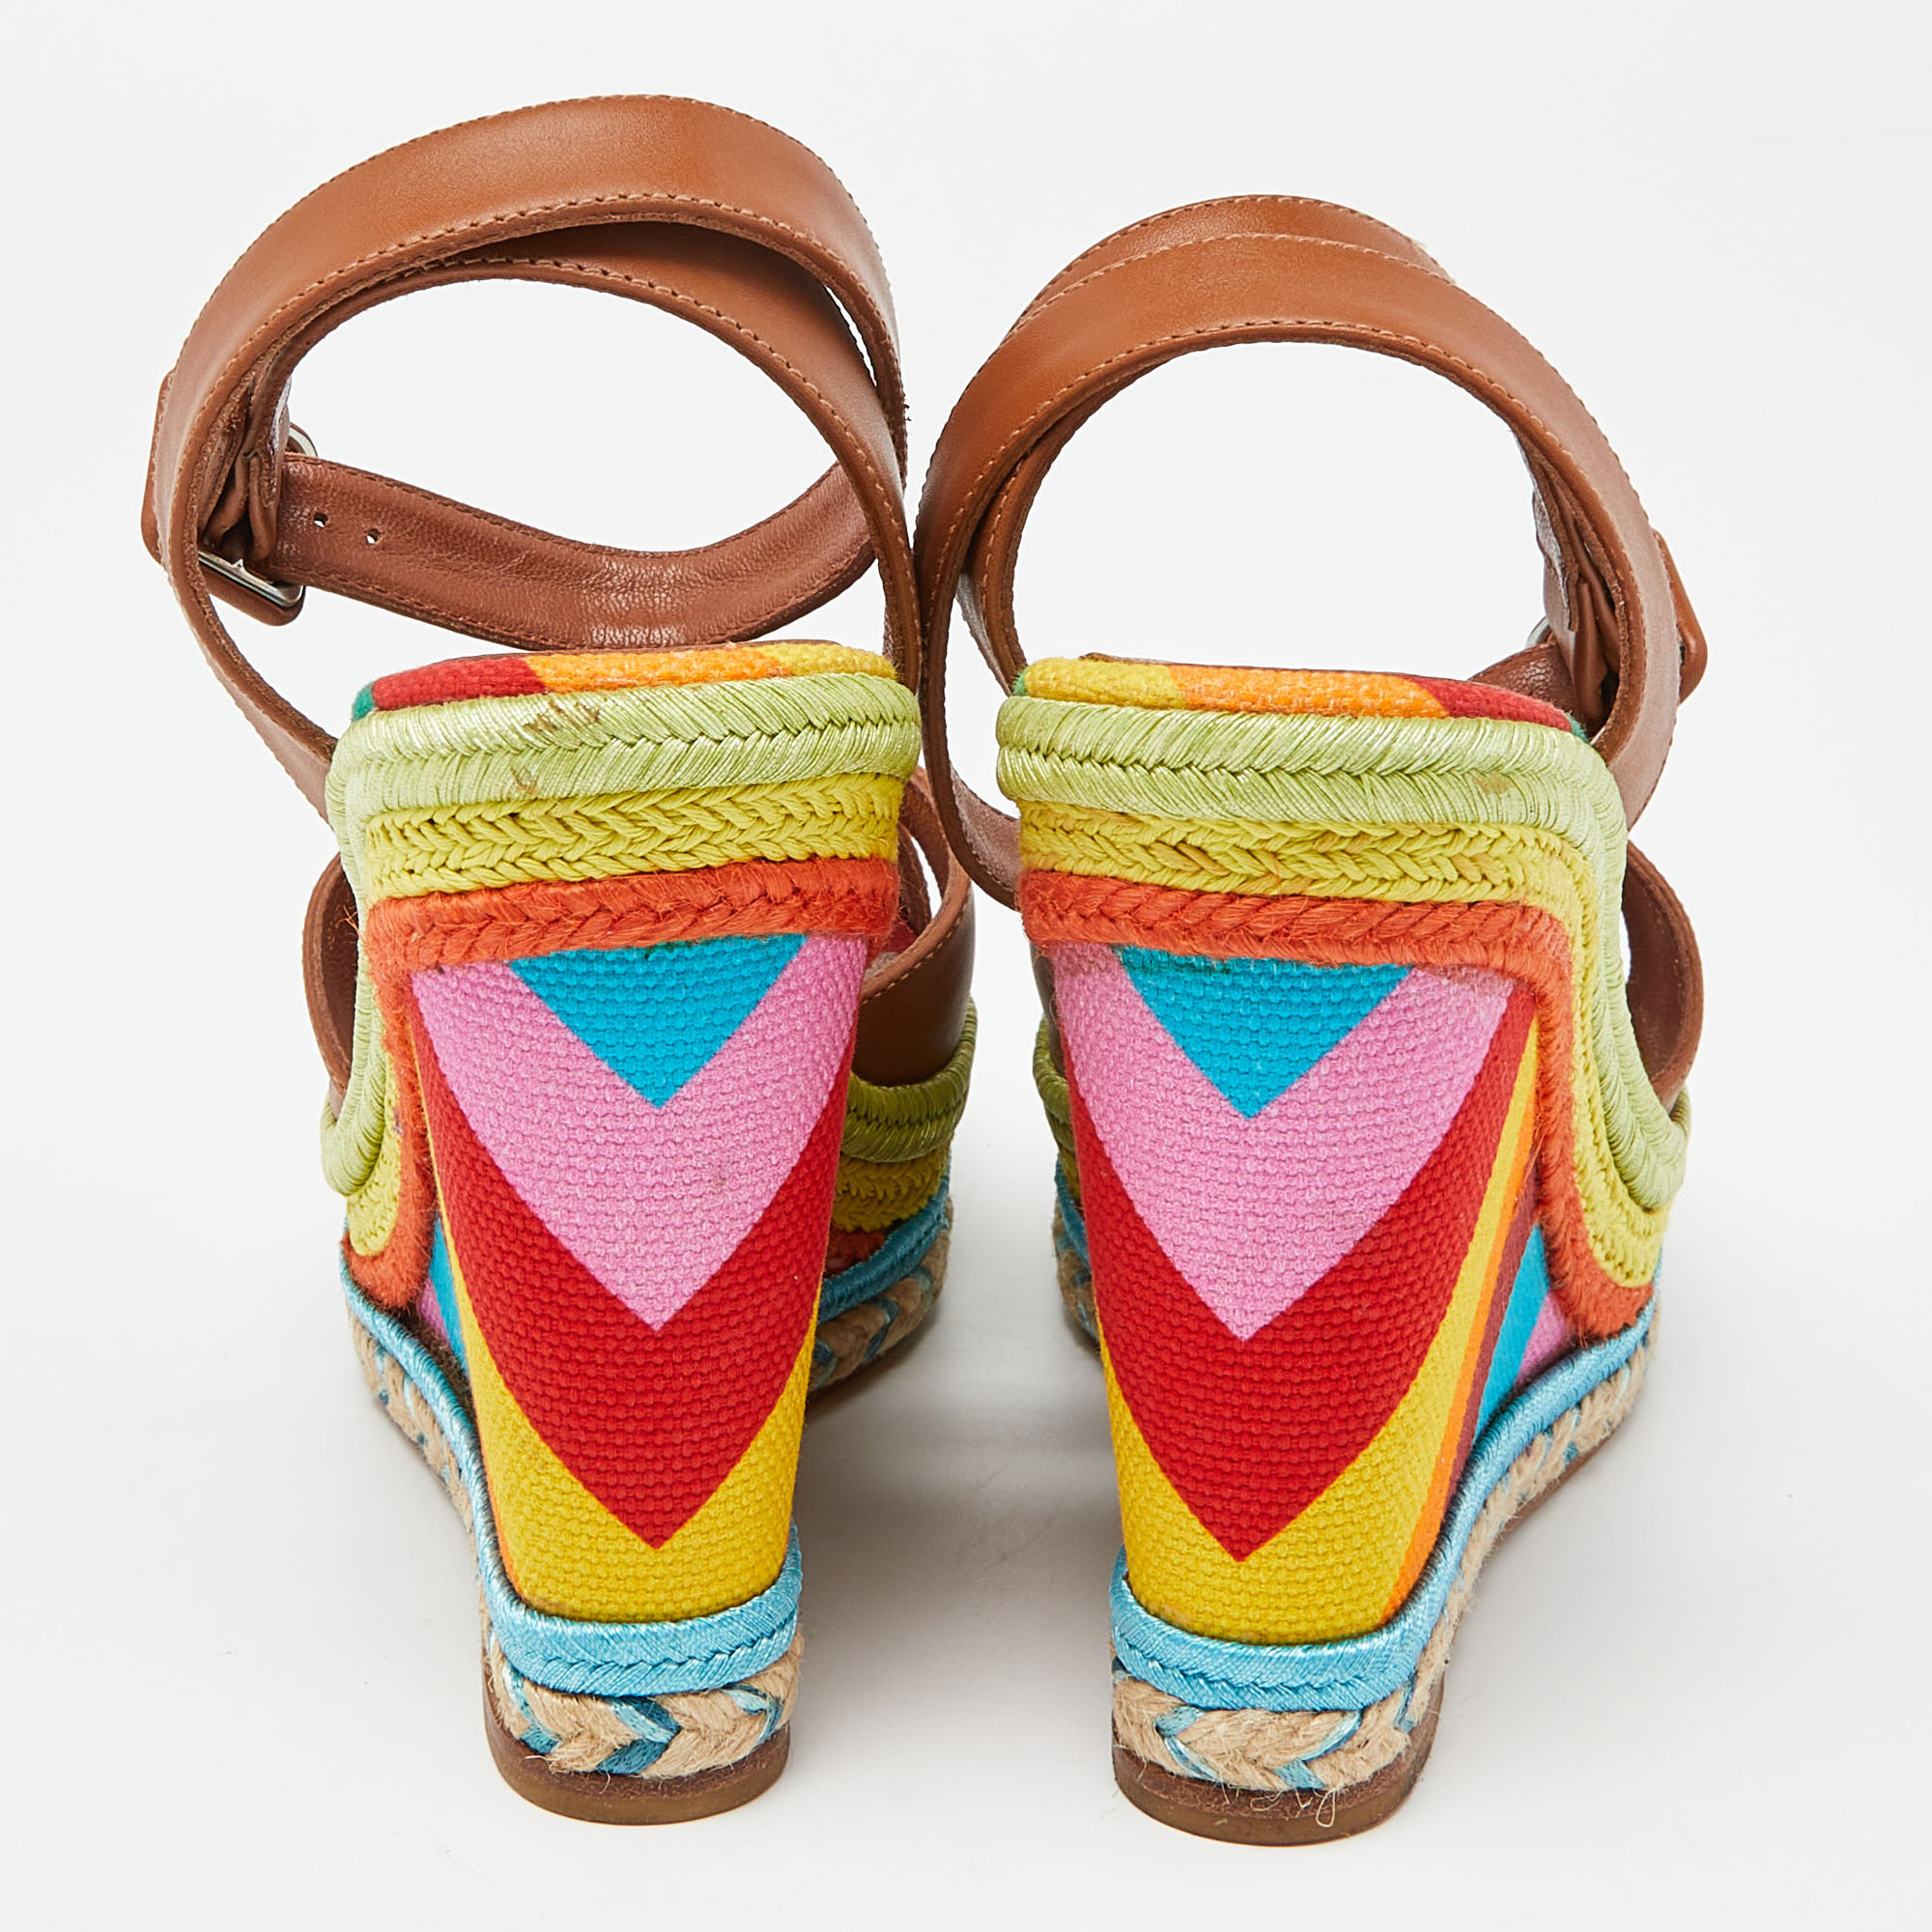 Valentino Multicolor Leather Espadrille Wedge Ankle Strap Sandals Size 36